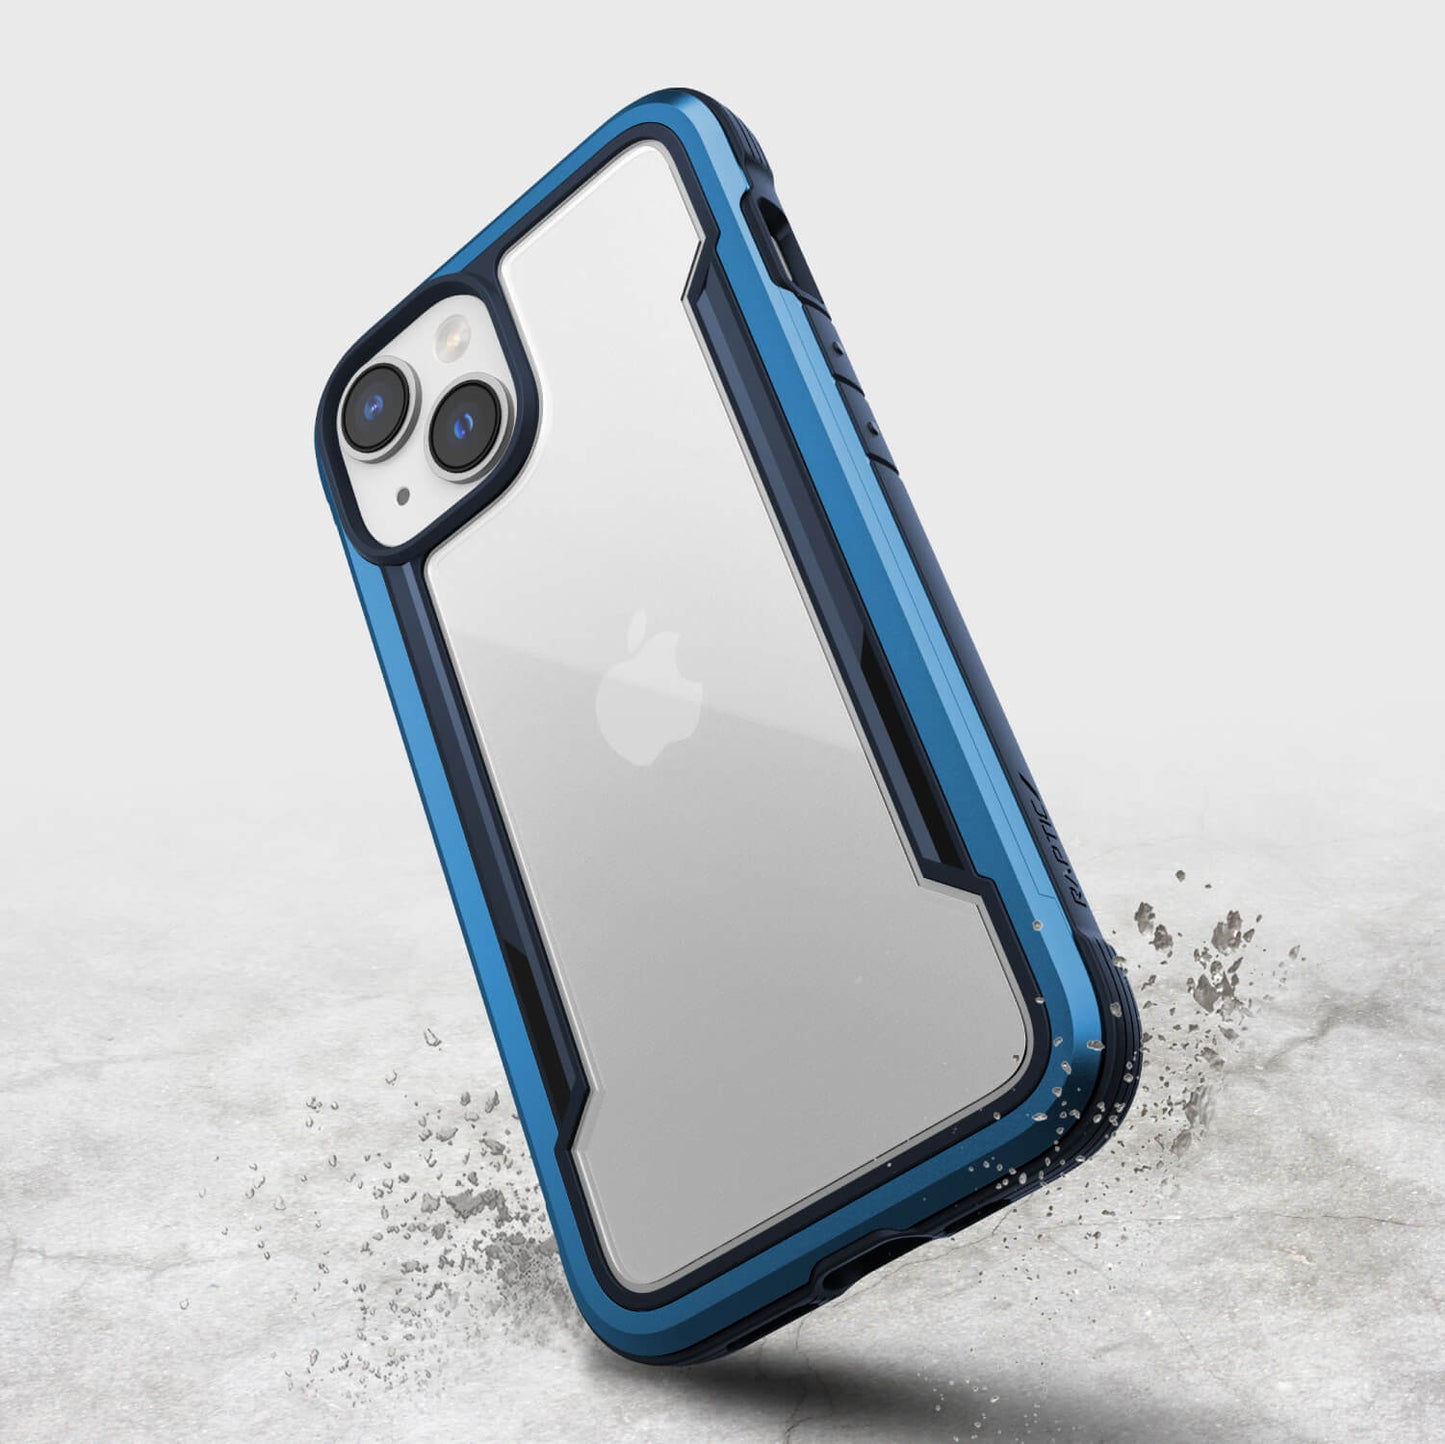 The iPhone 14 Case - Shield by Raptic is shown in blue, offering screen protection.